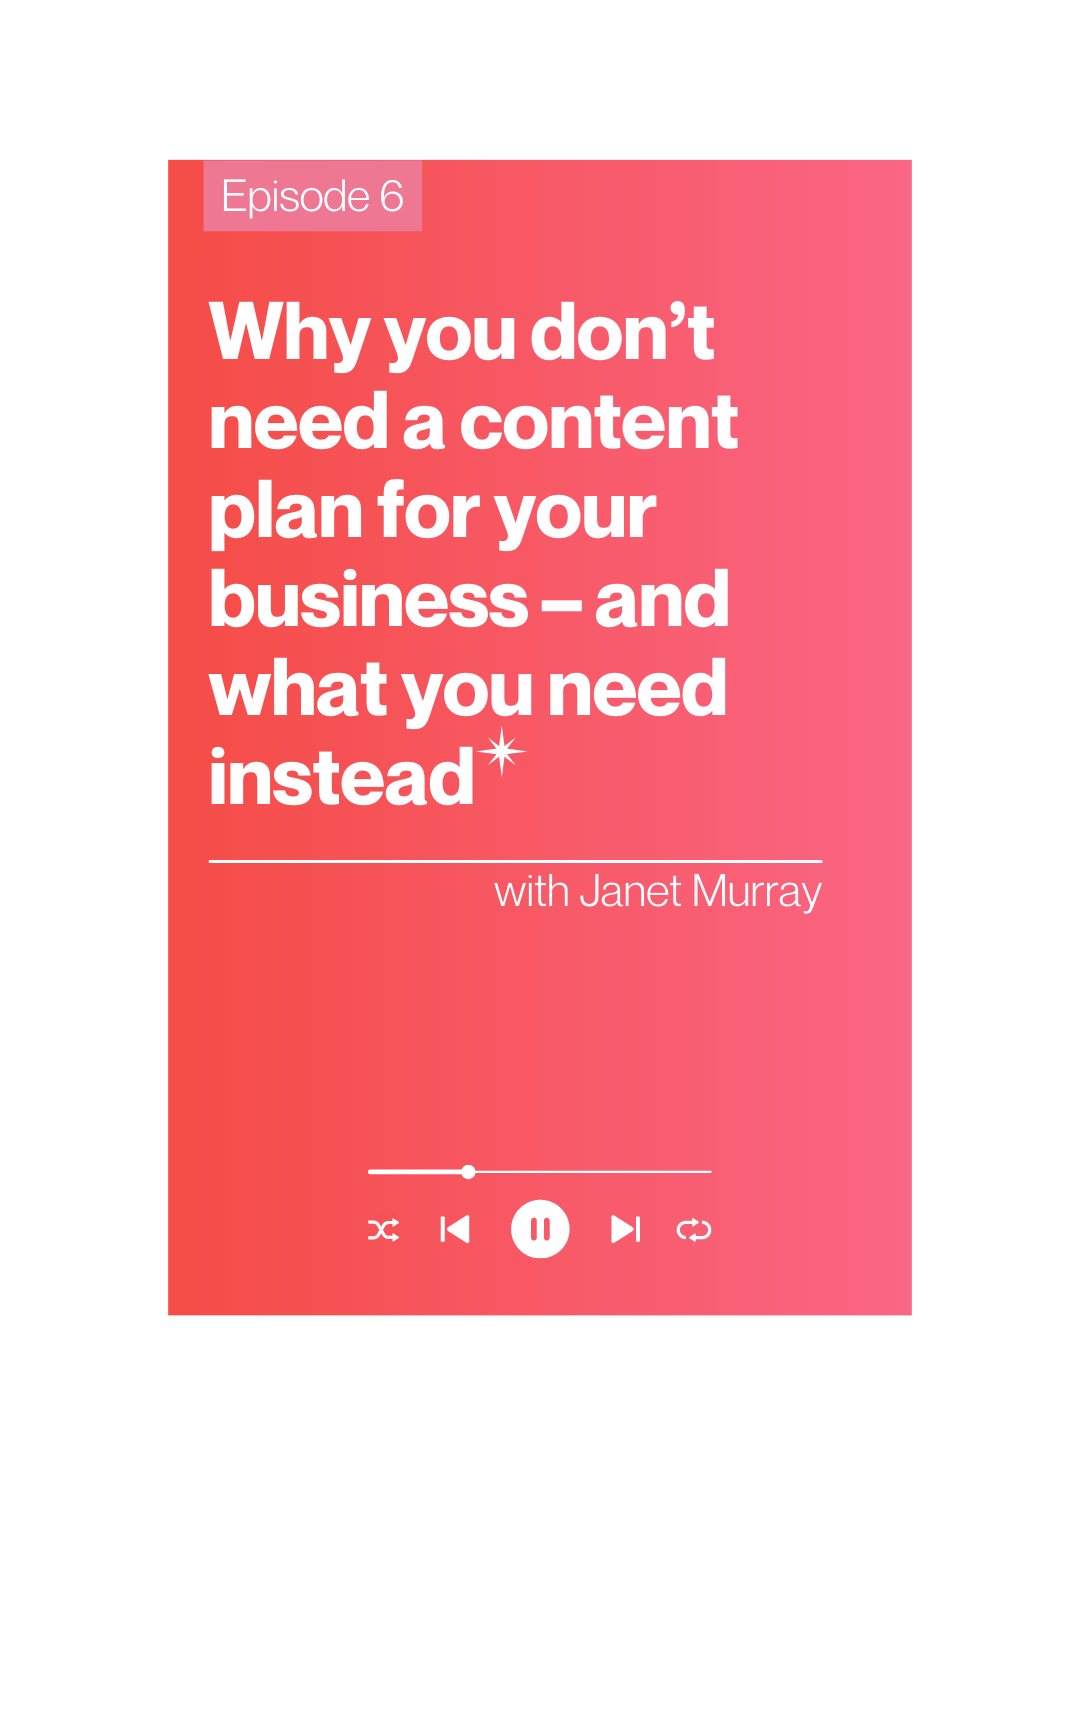 The Courageous CEO podcast, episode 6: Why you don’t need a content plan for your business - and what you need instead